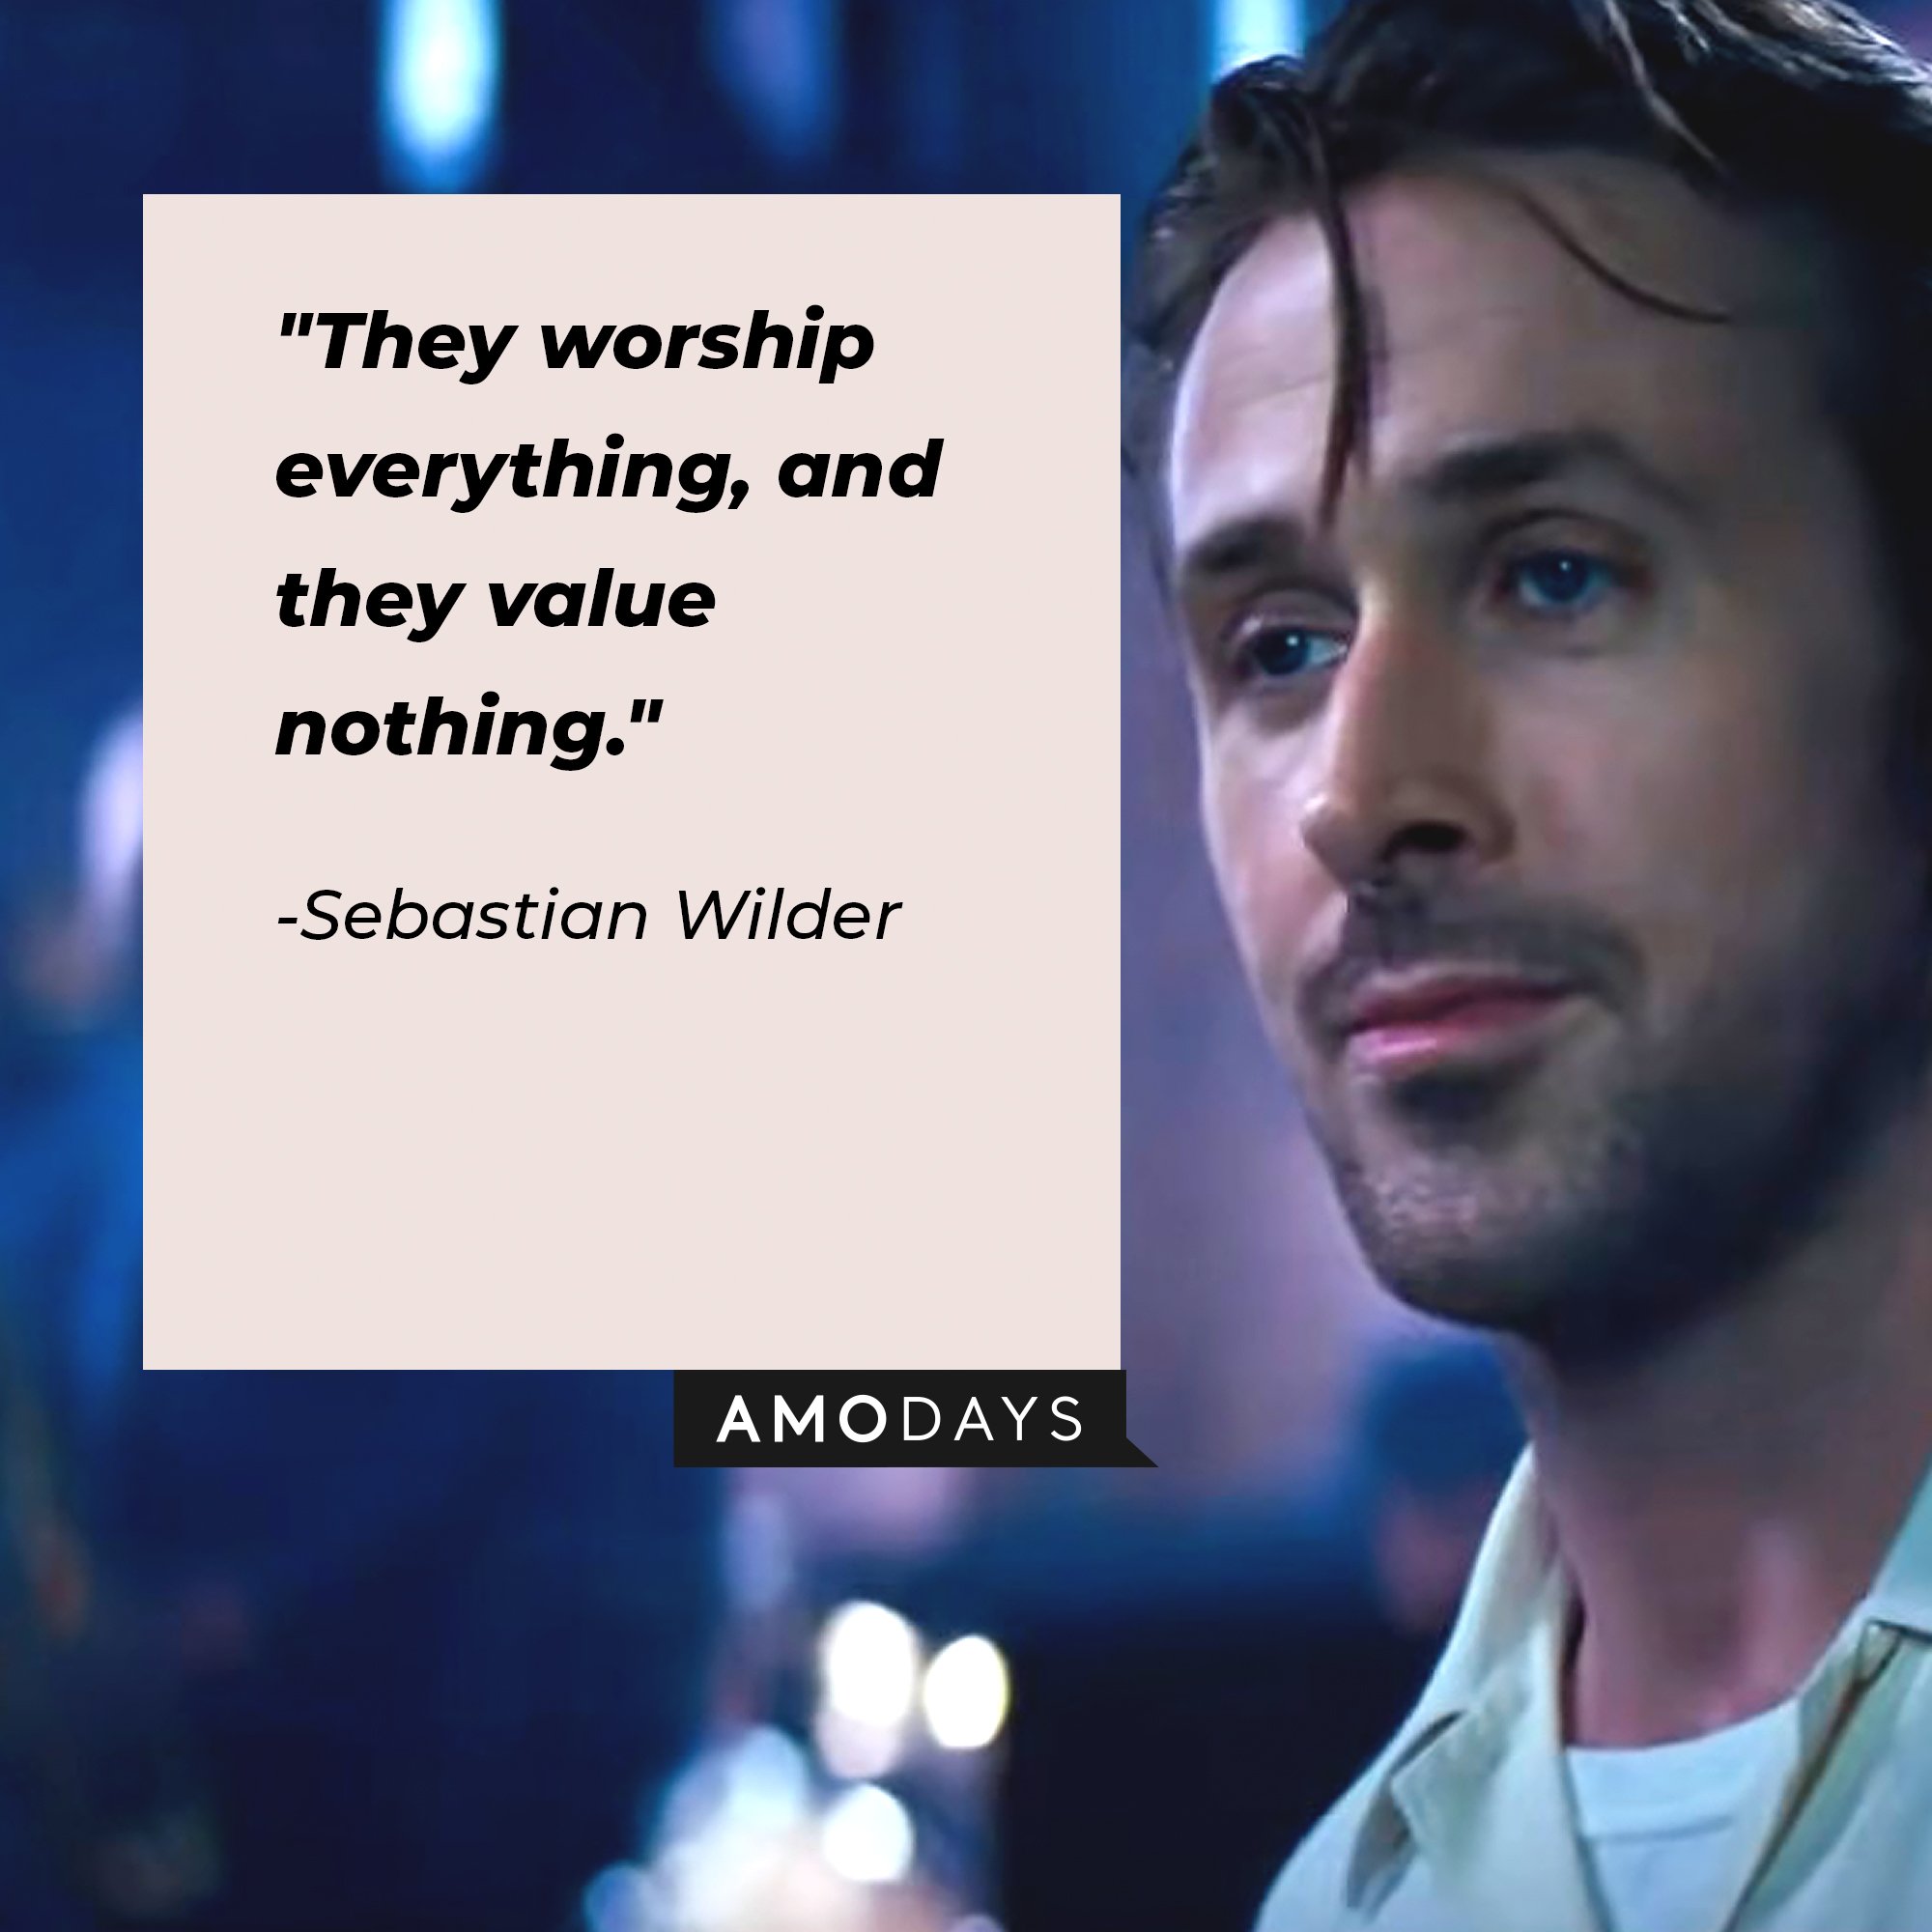 Sebastian Wilder’s quote: "They worship everything, and they value nothing." | Image: AmoDays